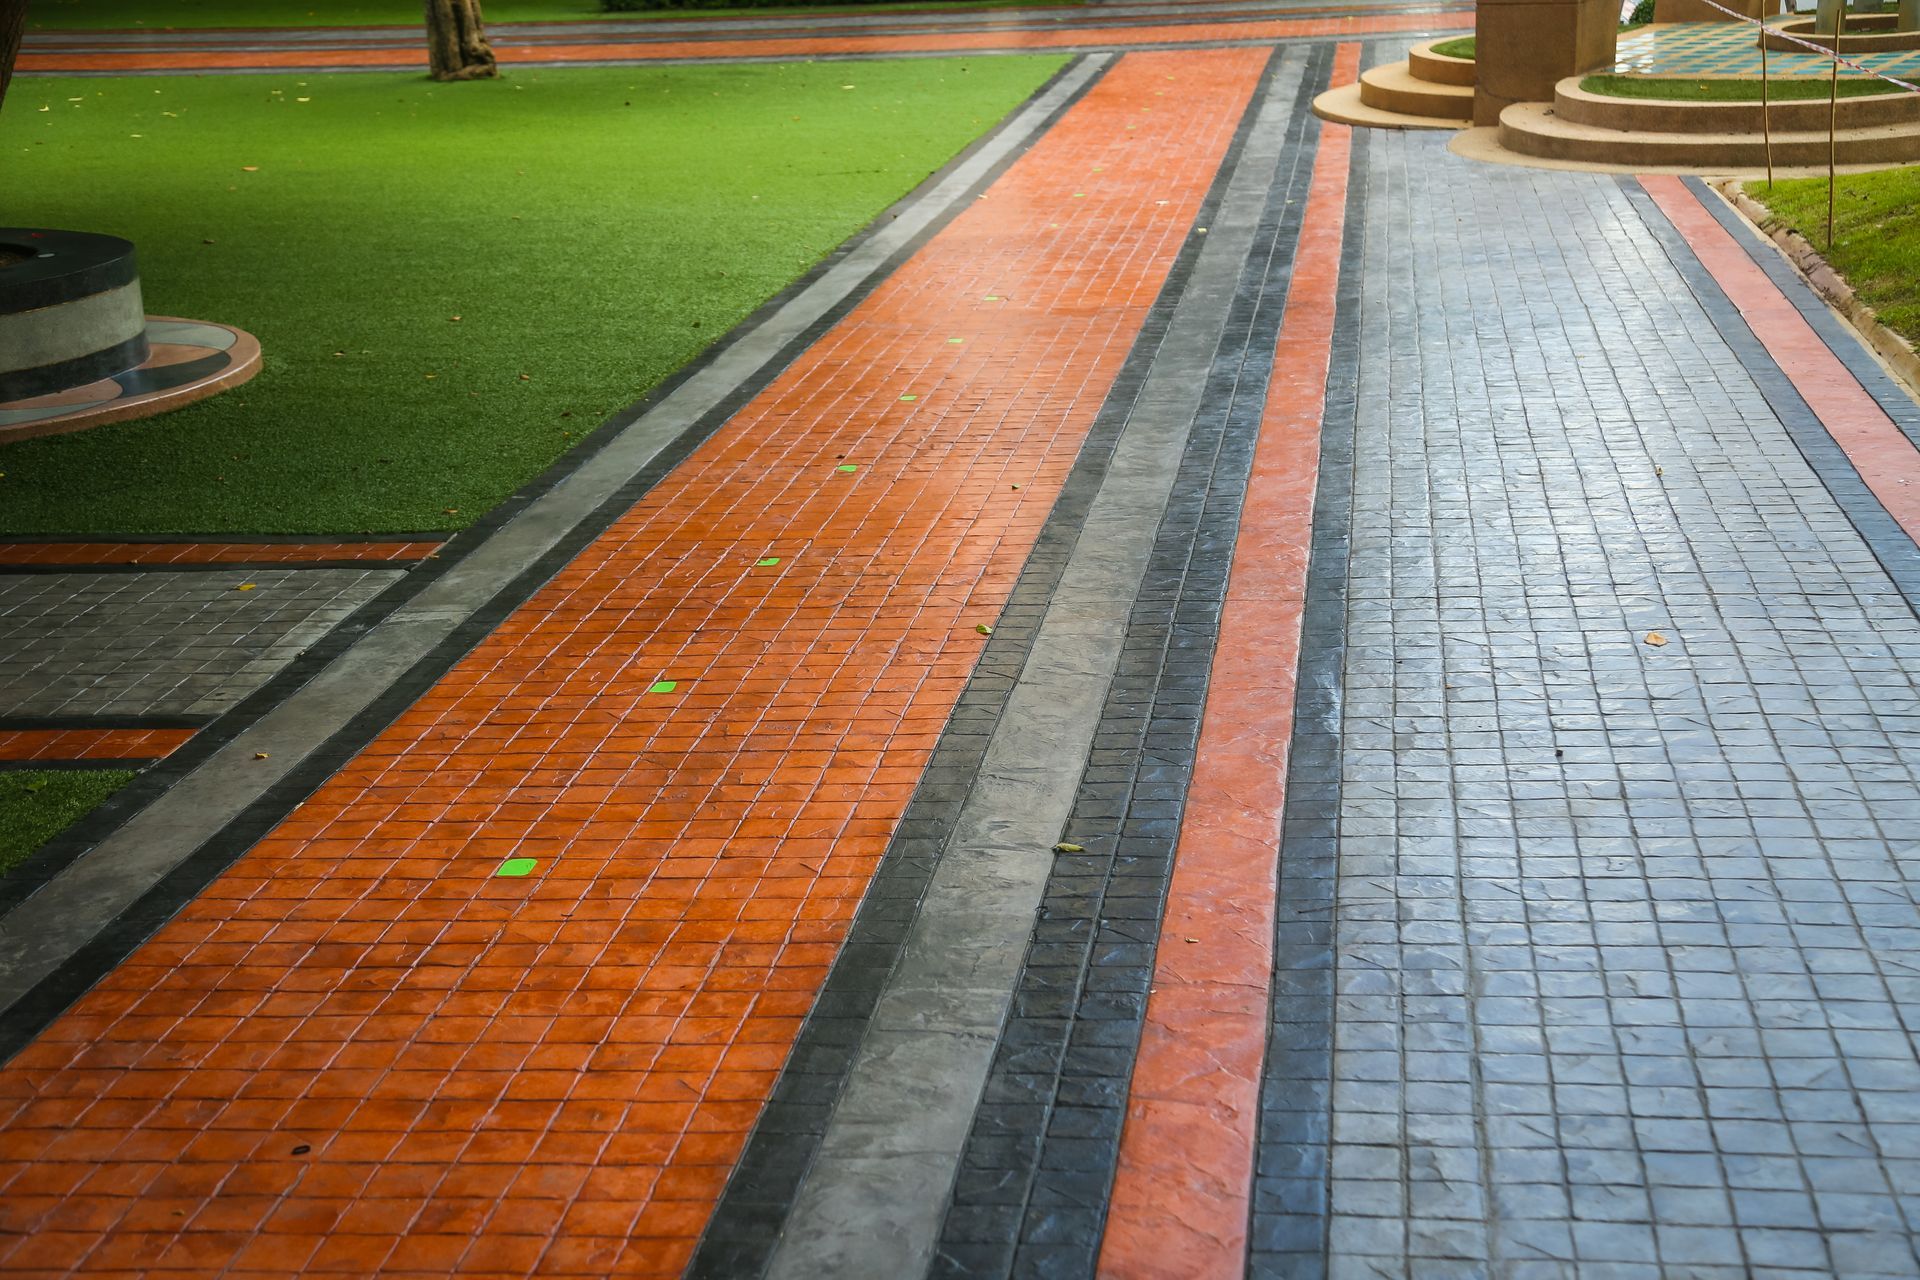 A brick walkway in a park with a grassy area in the background.